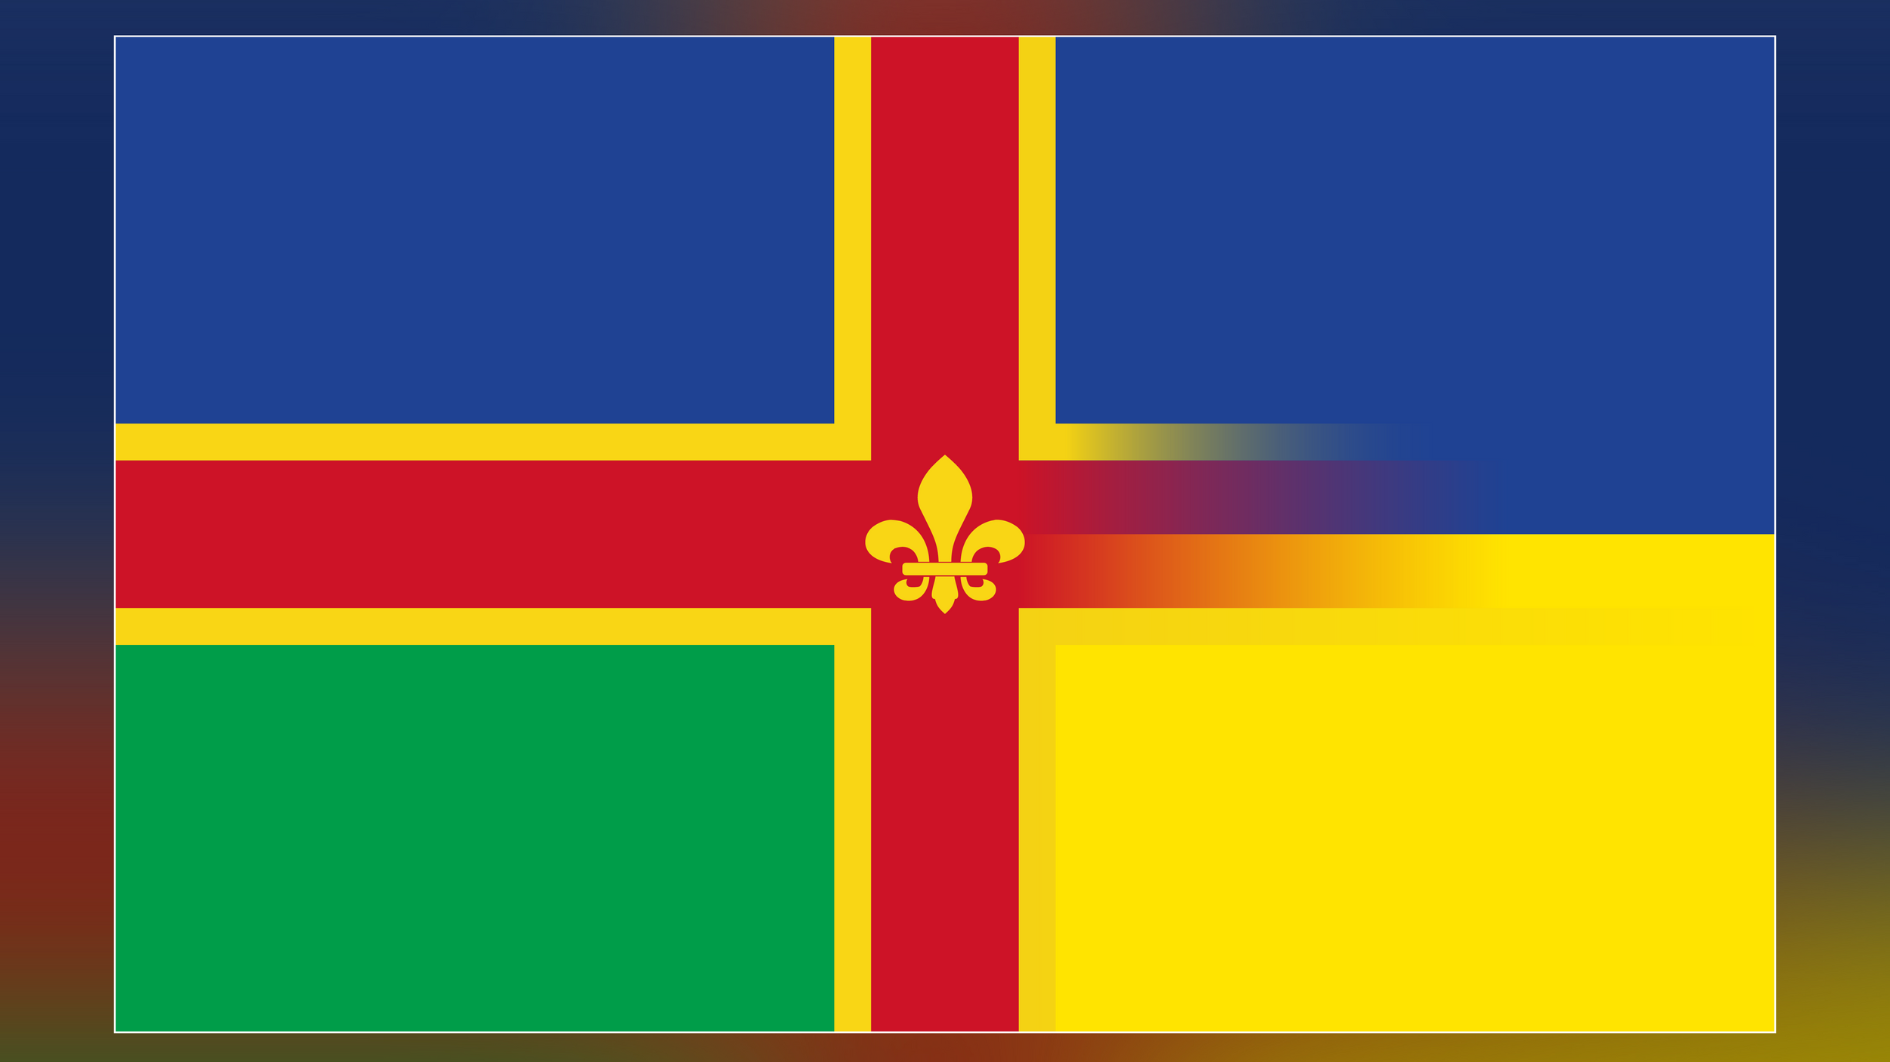 A flag with a red cross in the centre followed by a yellow cross and a yellow fleur de lis in the middle. The four segments of the cross feature, top right is blue, bottom right yellow, bottom left green and top left blue.